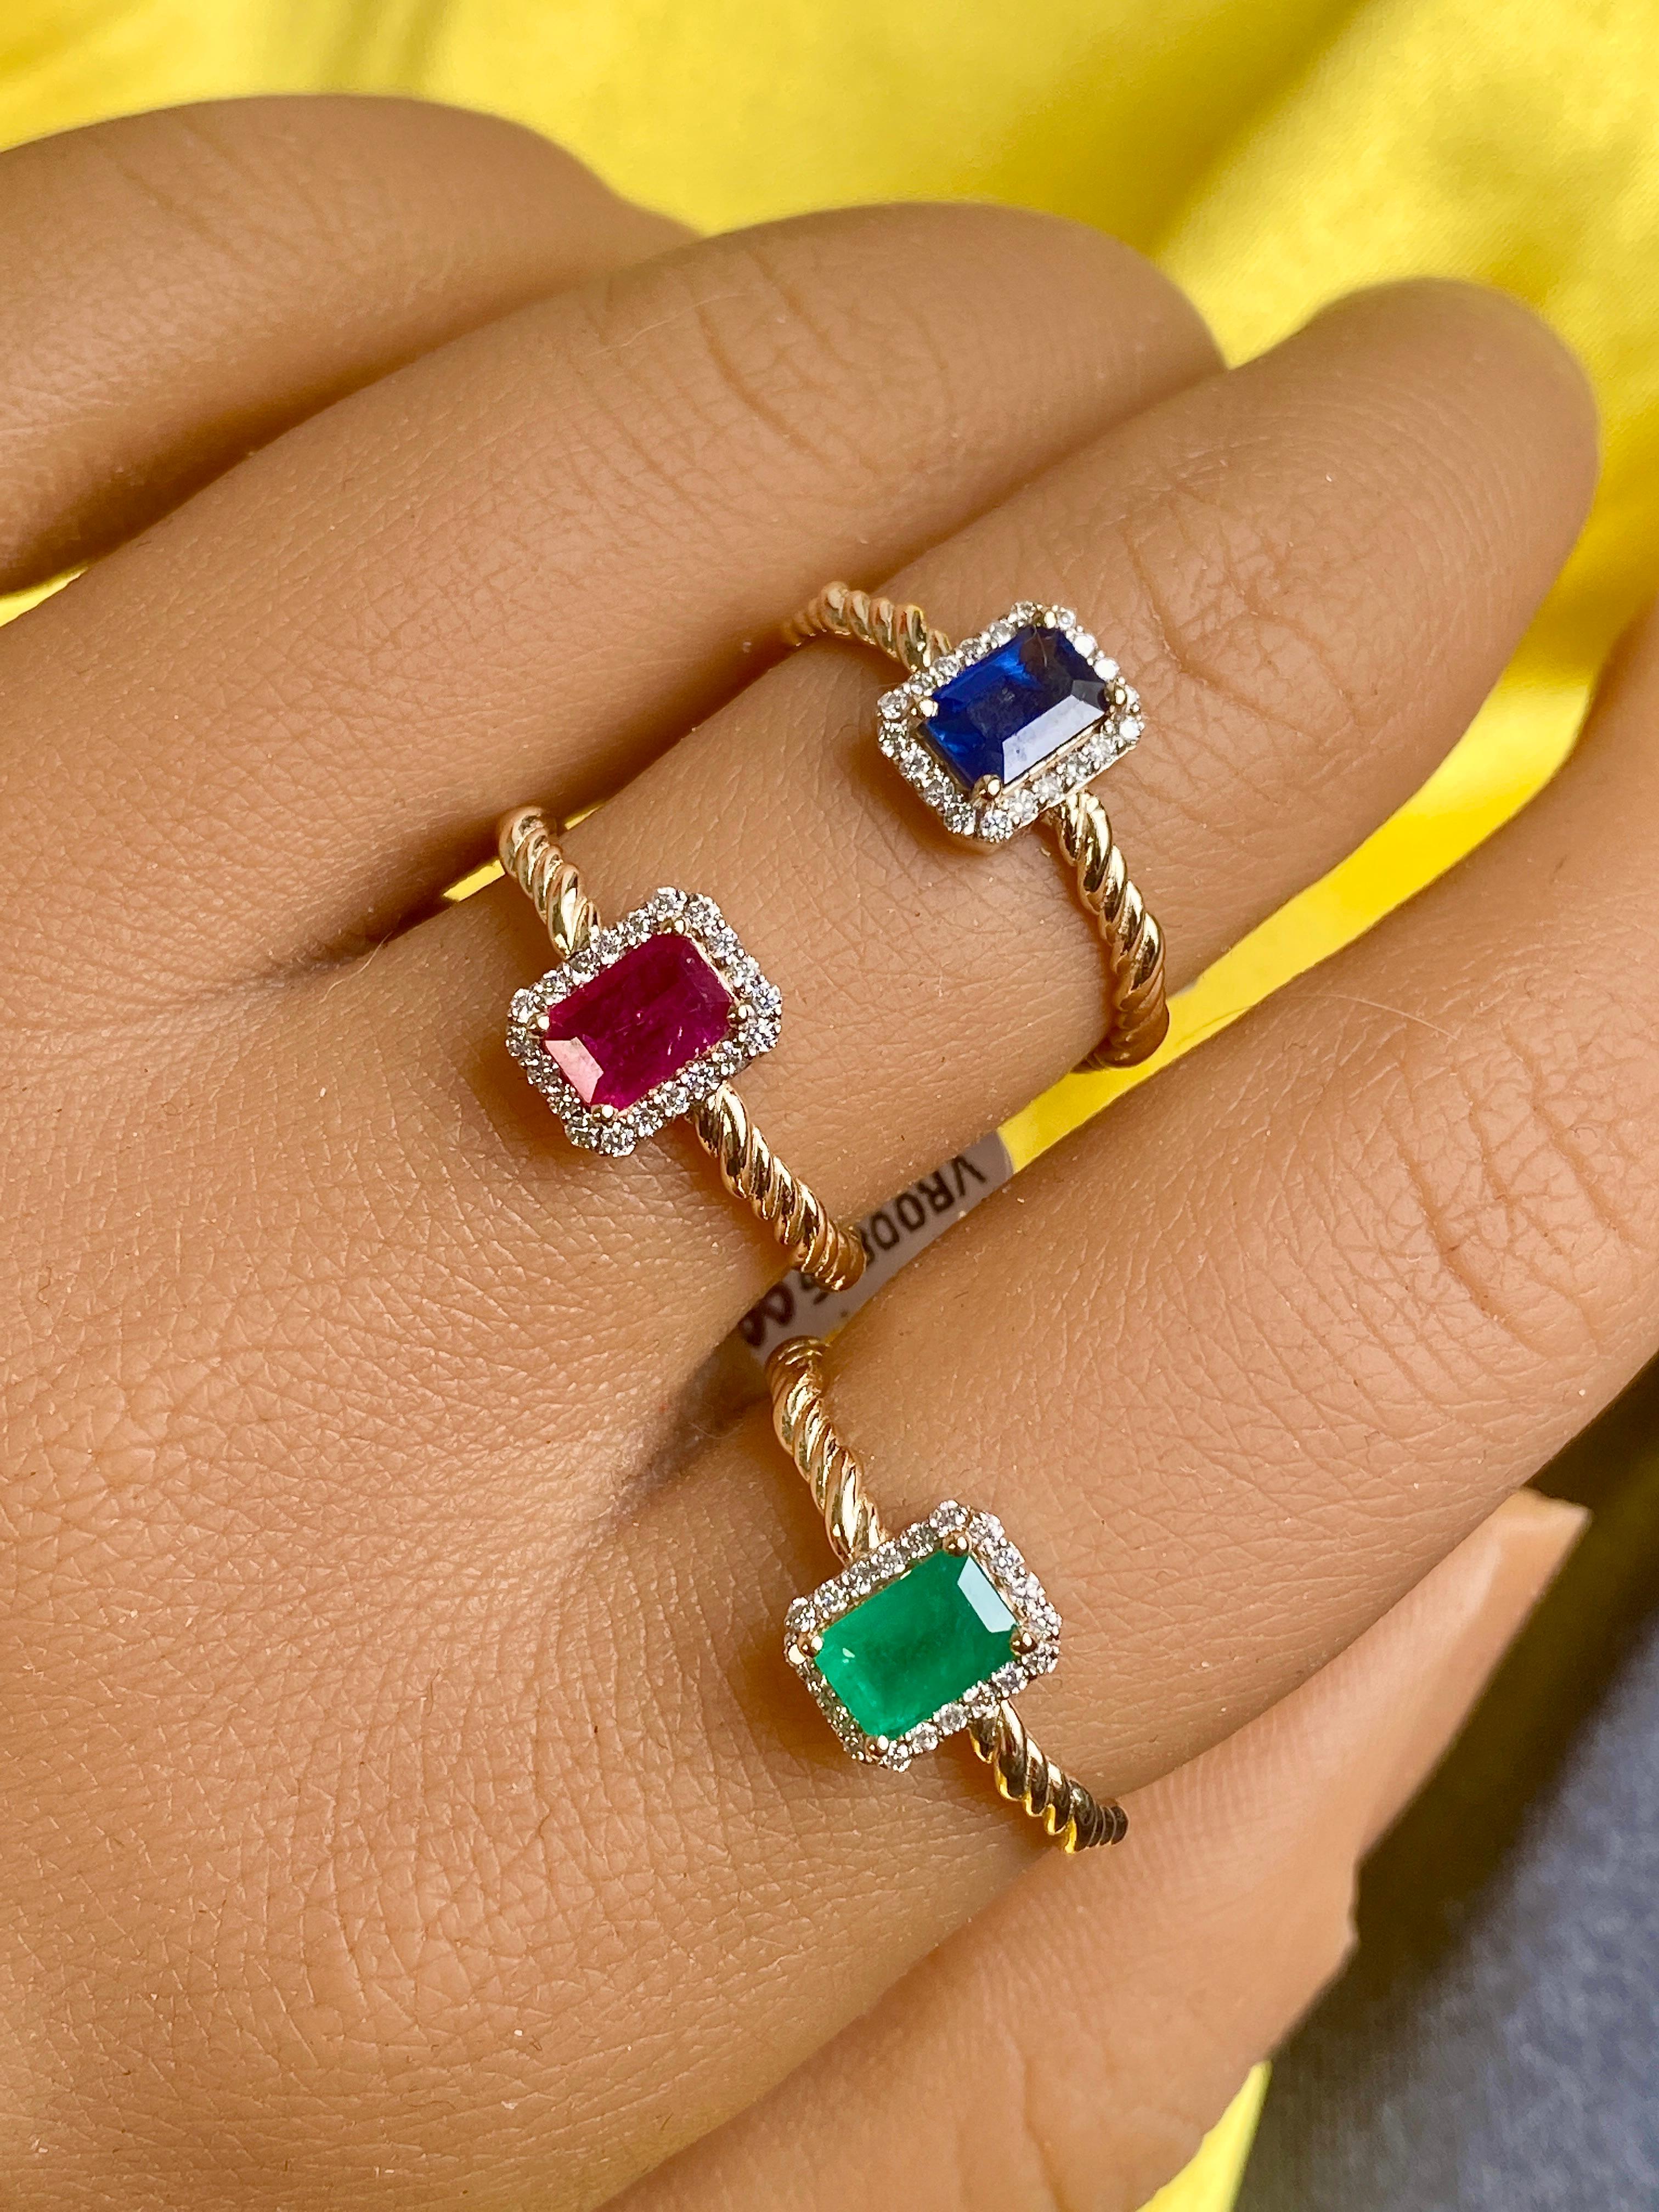 Emerald Cut Gemstone Solitaire Rings, Ruby Ring, Emerald Ring, Sapphire Ring, 14k Gold Ring For Sale